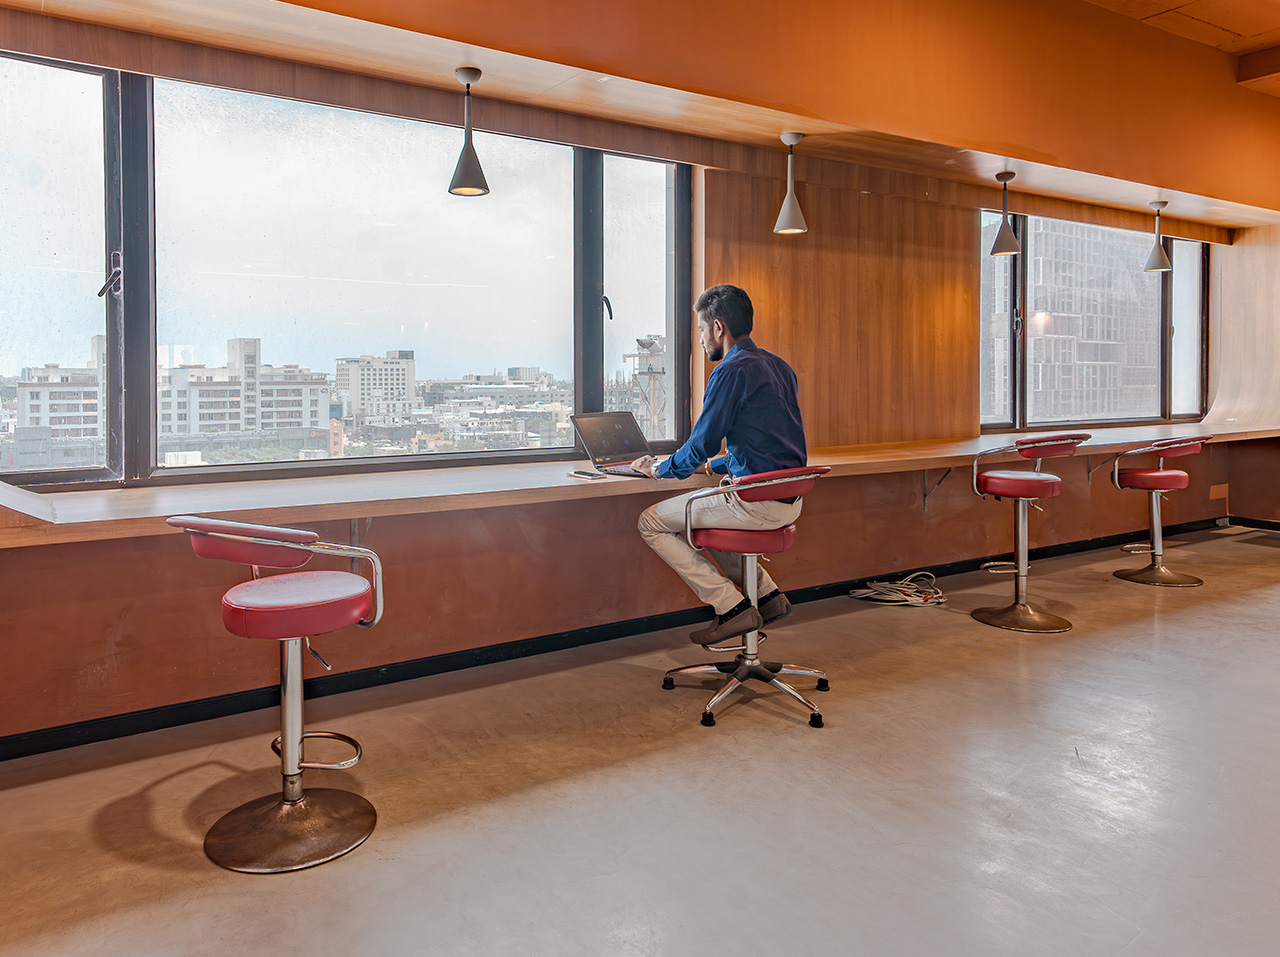 : Cove coworking offices’ in OMR Chennai with flexible seating options